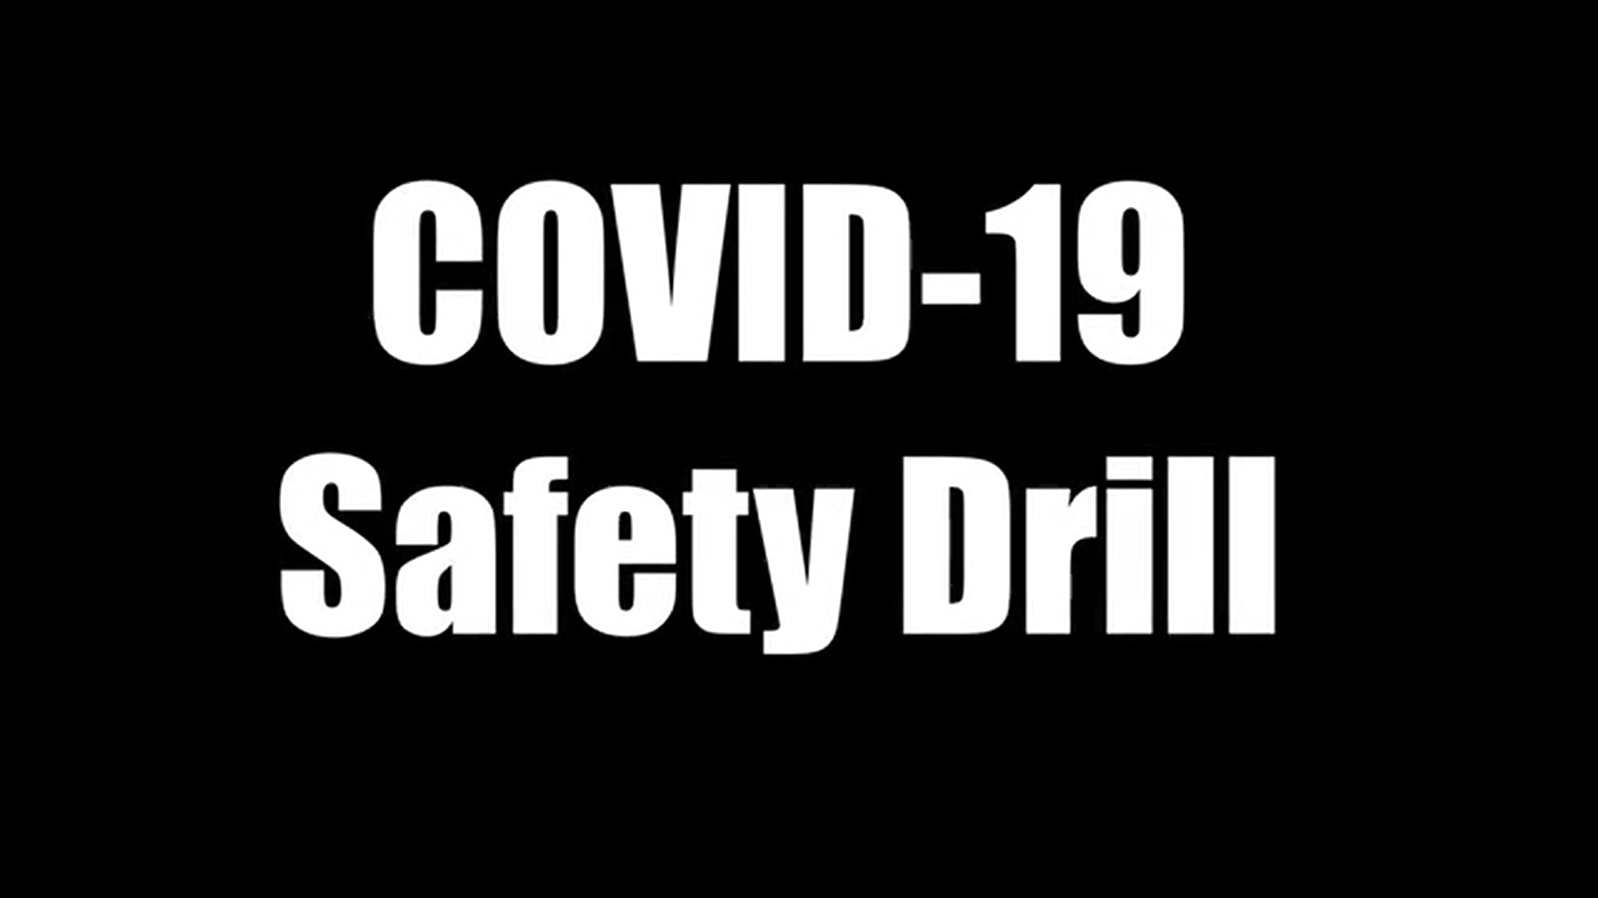 GBCA Holds COVID-19 Safety Drill